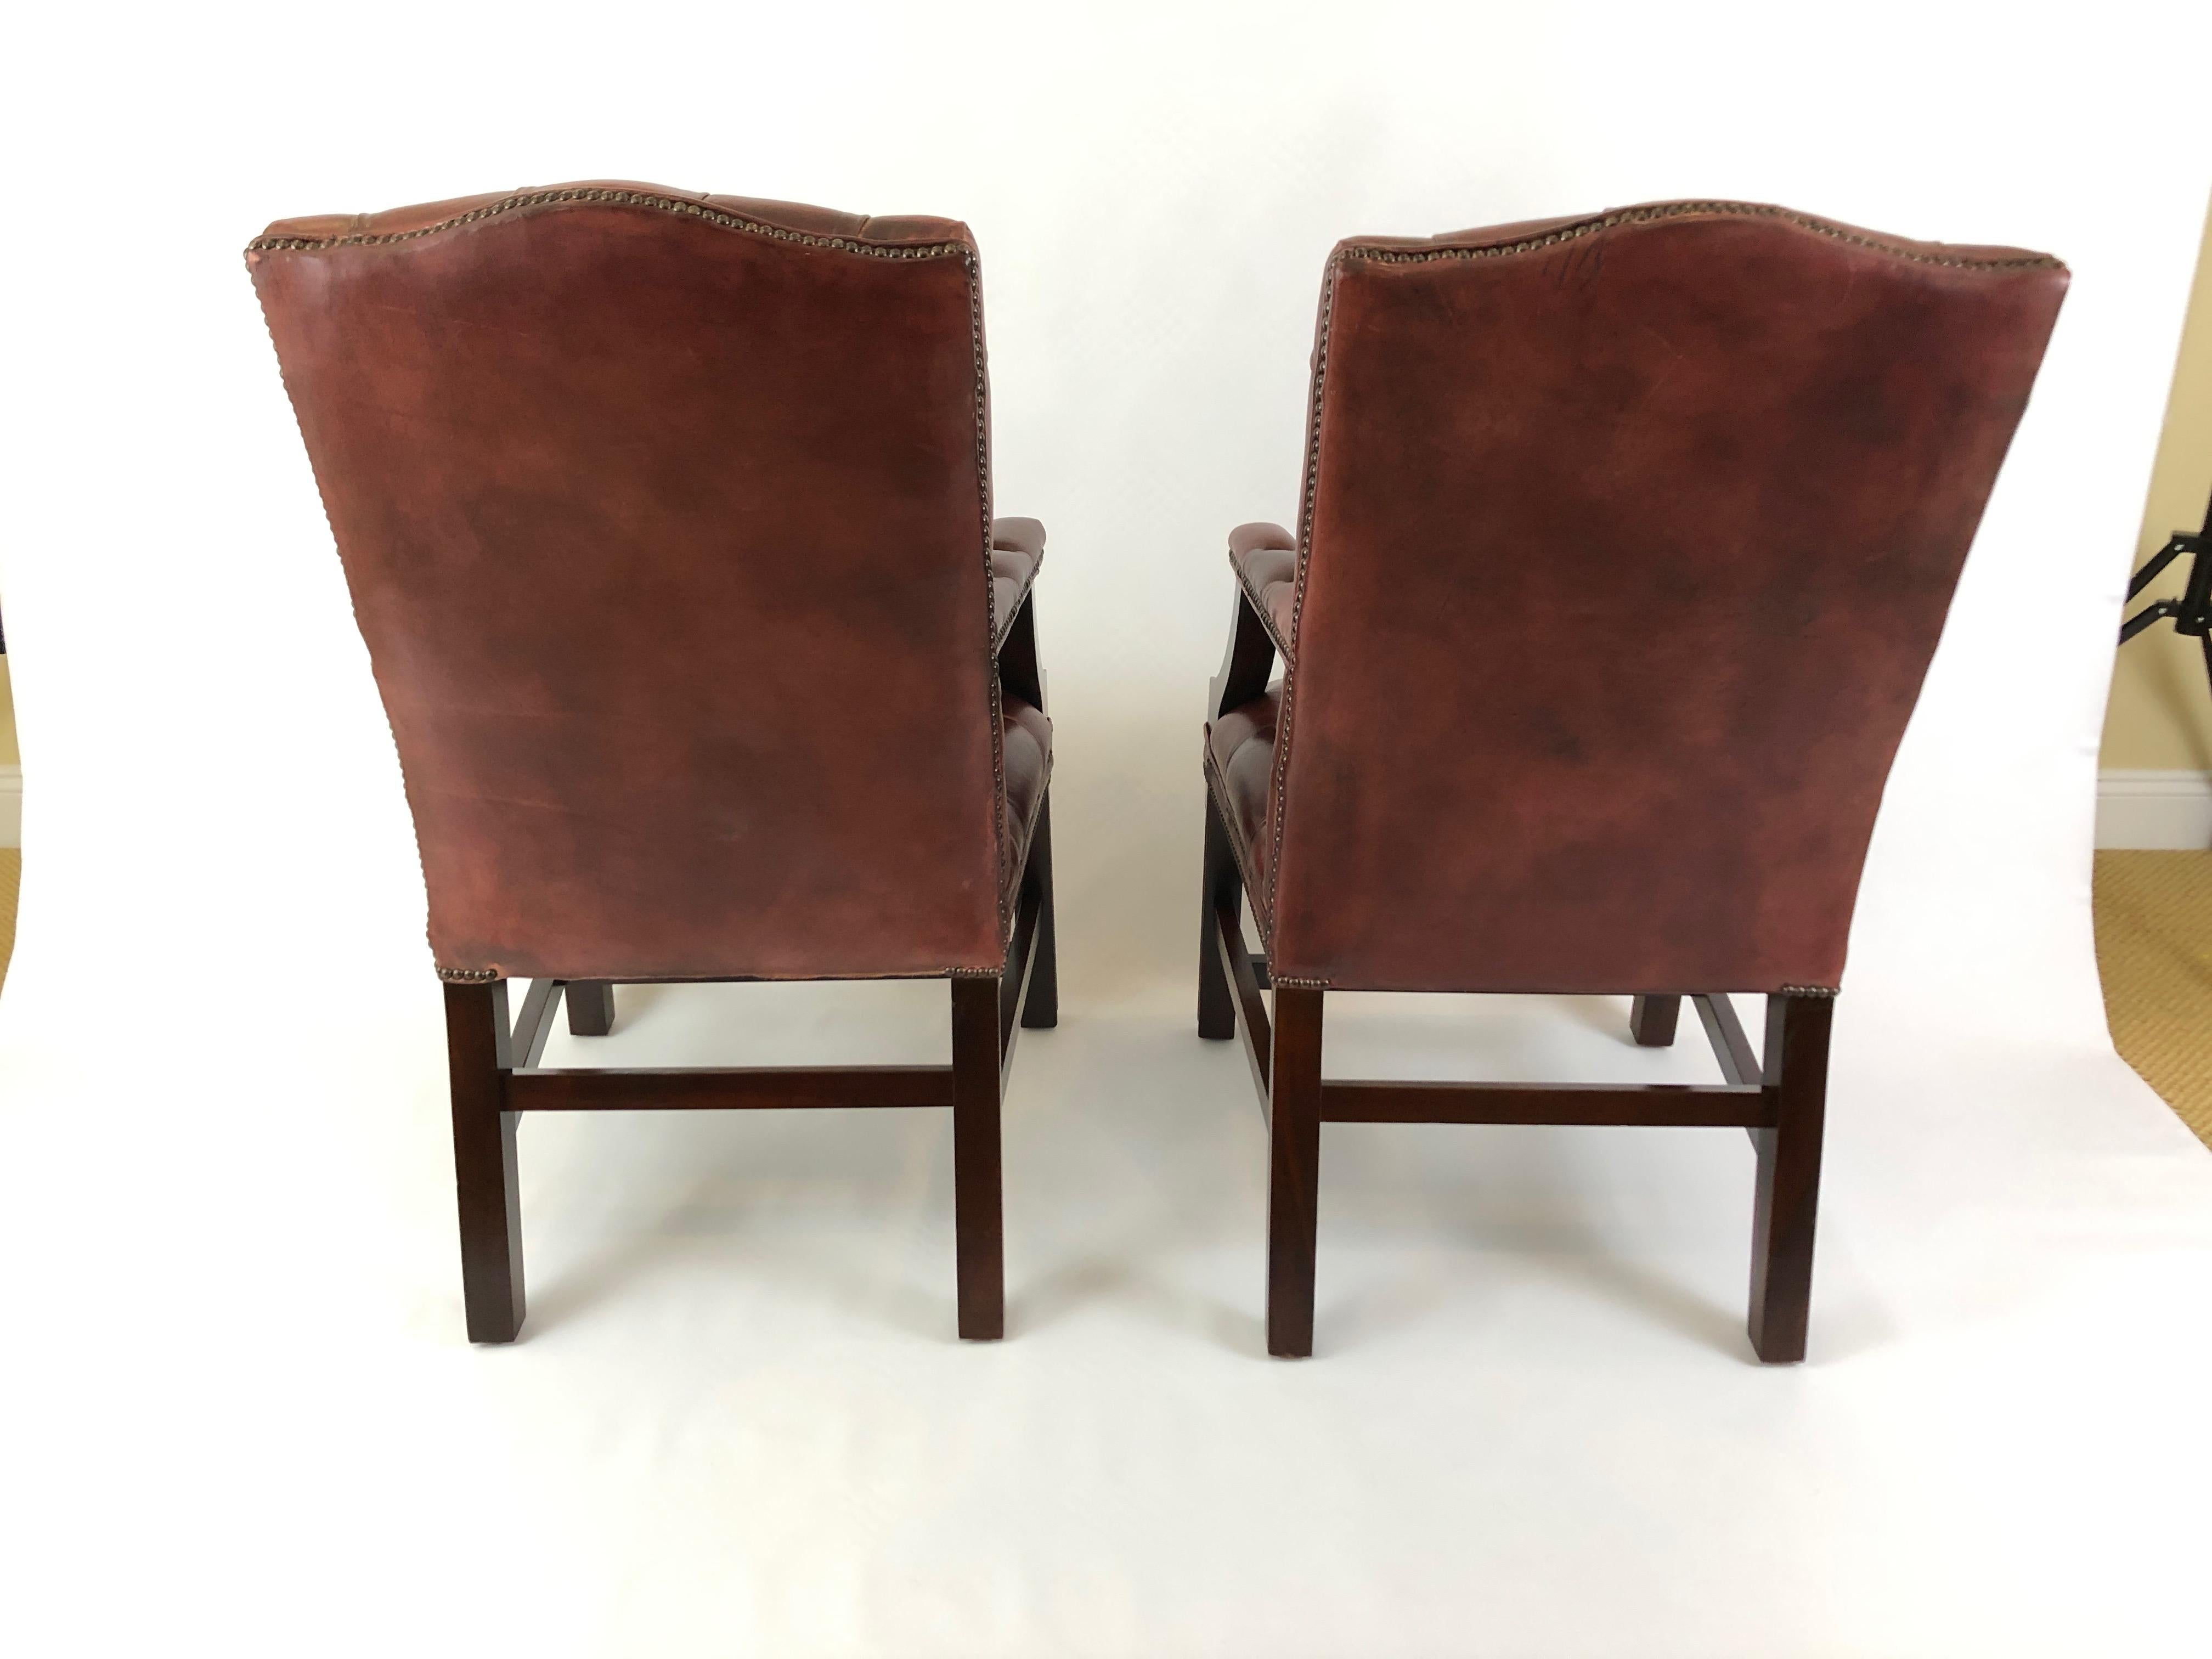 Libraryish Pair of Chesterfield Sumptuous Tufted Leather Armchairs 1